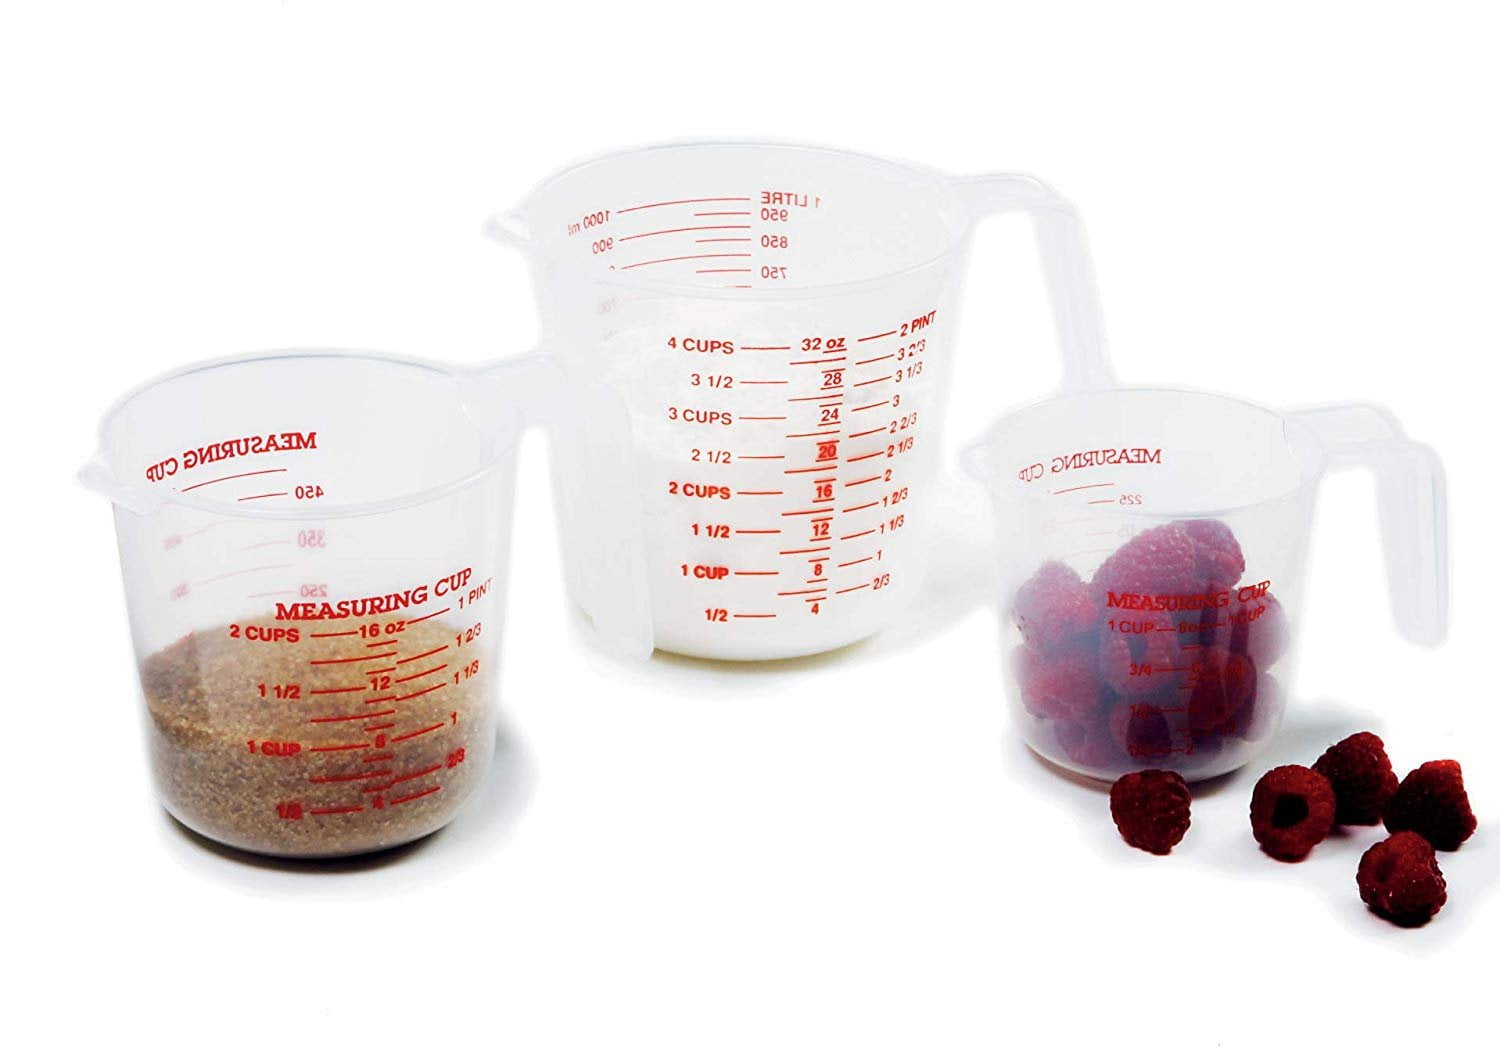 Norpro 1 Plastic Measuring Cup, Multicolored 1 cup, 2 cup, 4 cup Volume (3  Pack)